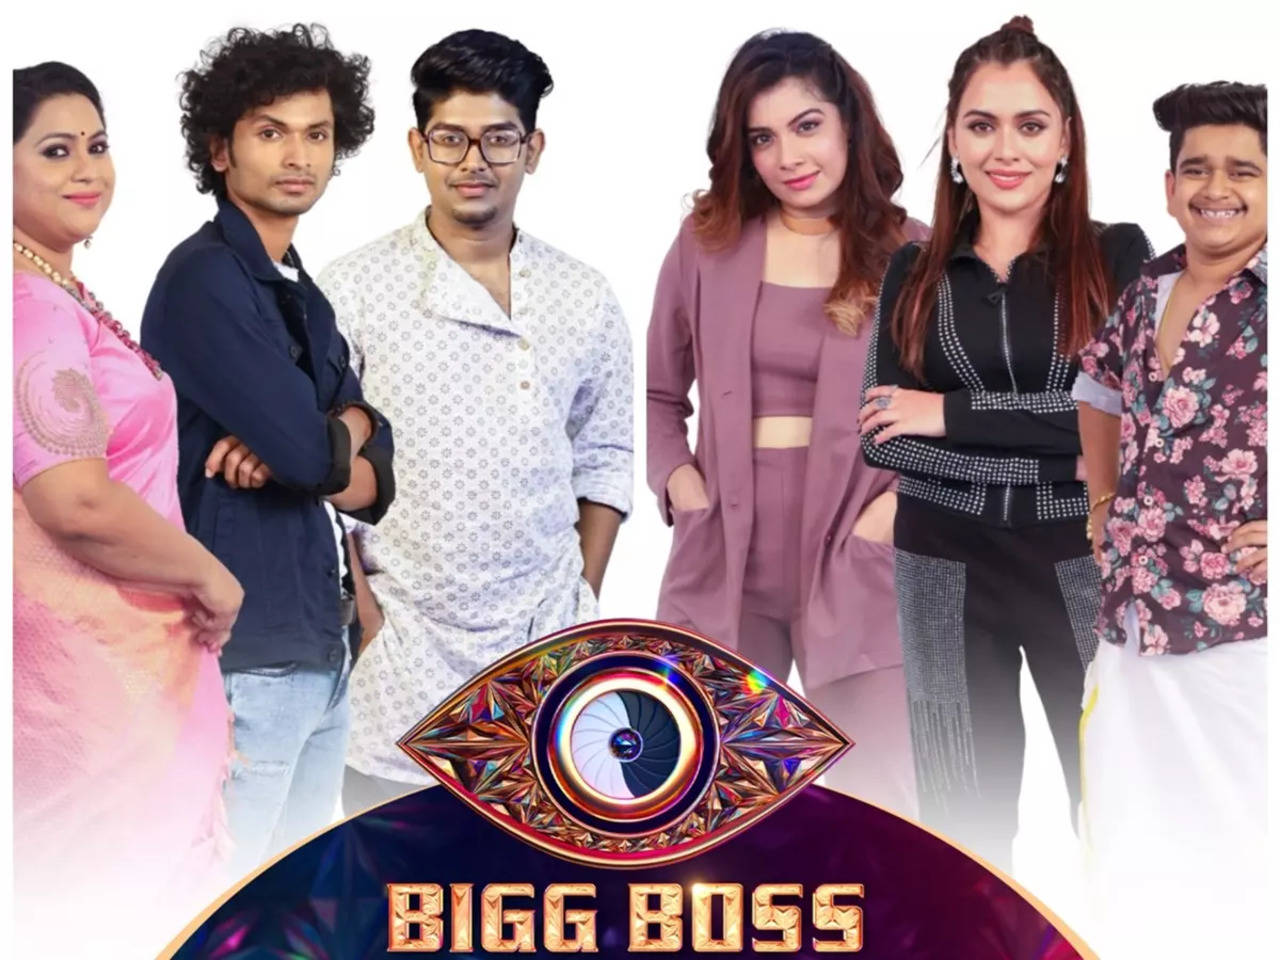 Bigg Boss Malayalam 4 winner: Who will lift the trophy? here's look at ETimes TV's poll result - Times of India